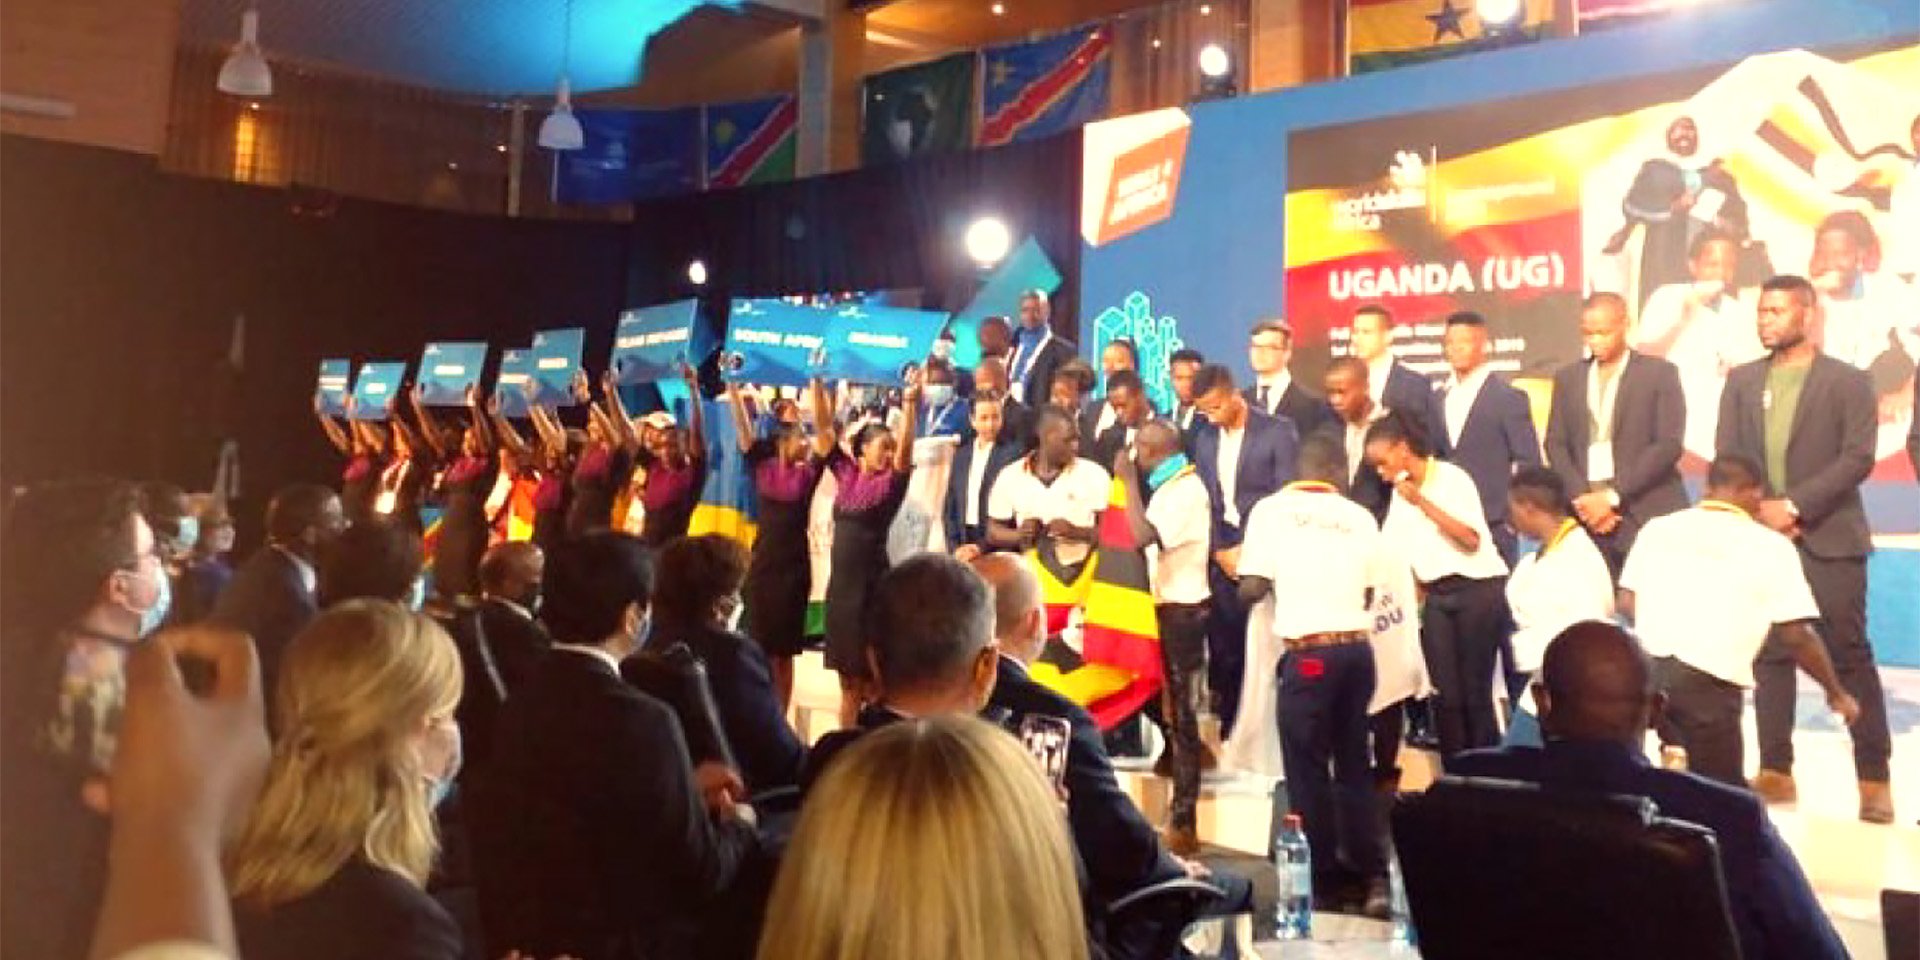 Participants of the WorldSkills Africa 2022 conference